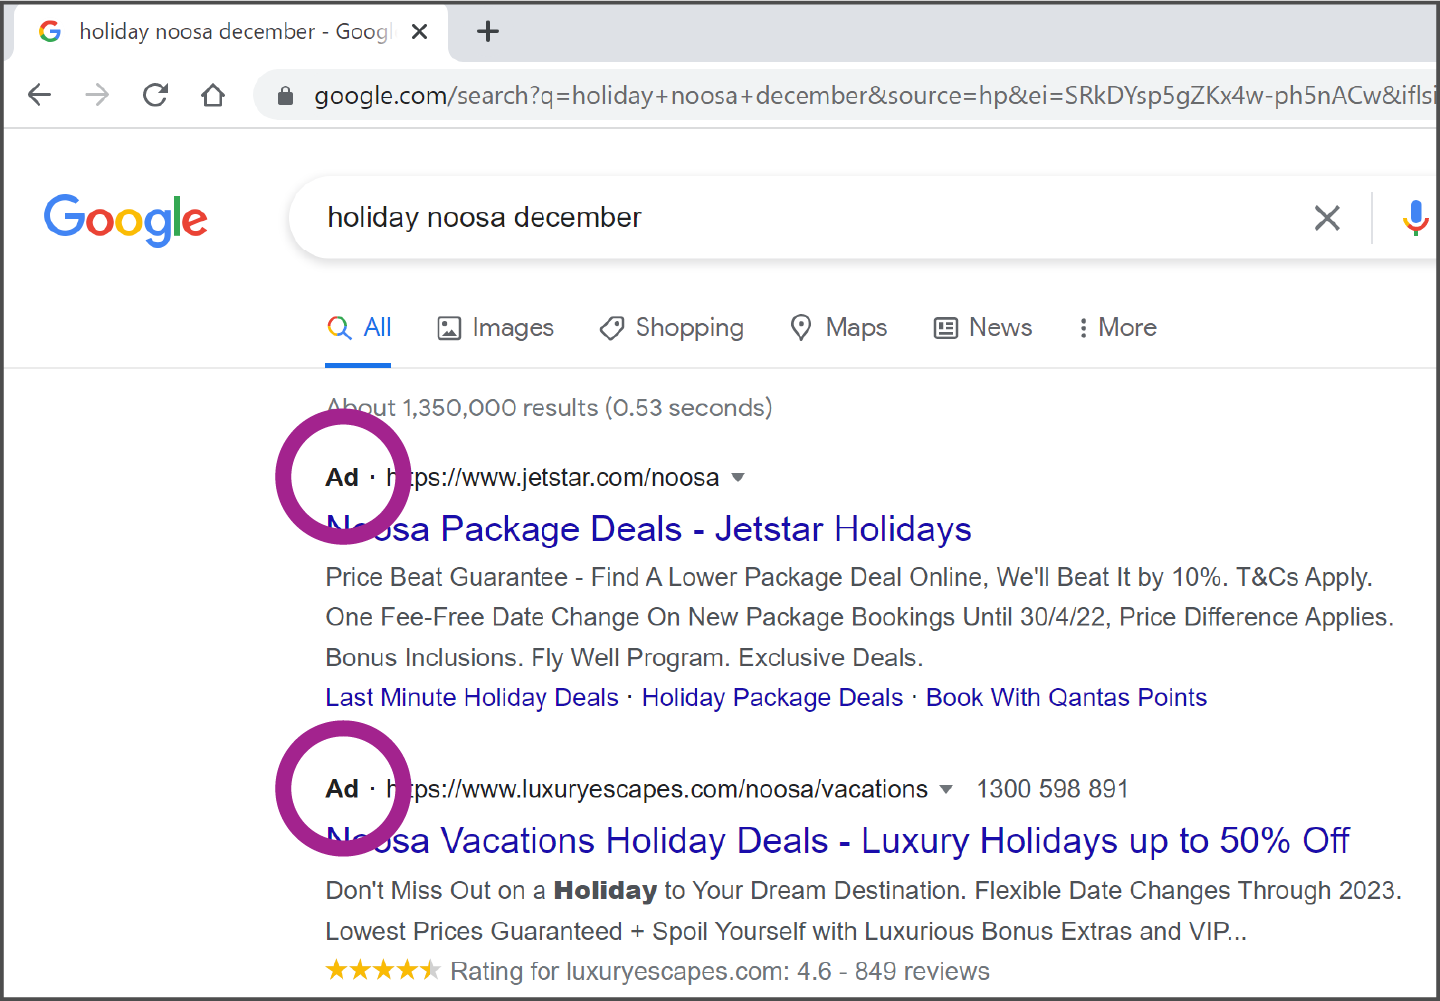 Google search results page with advertisements at the top